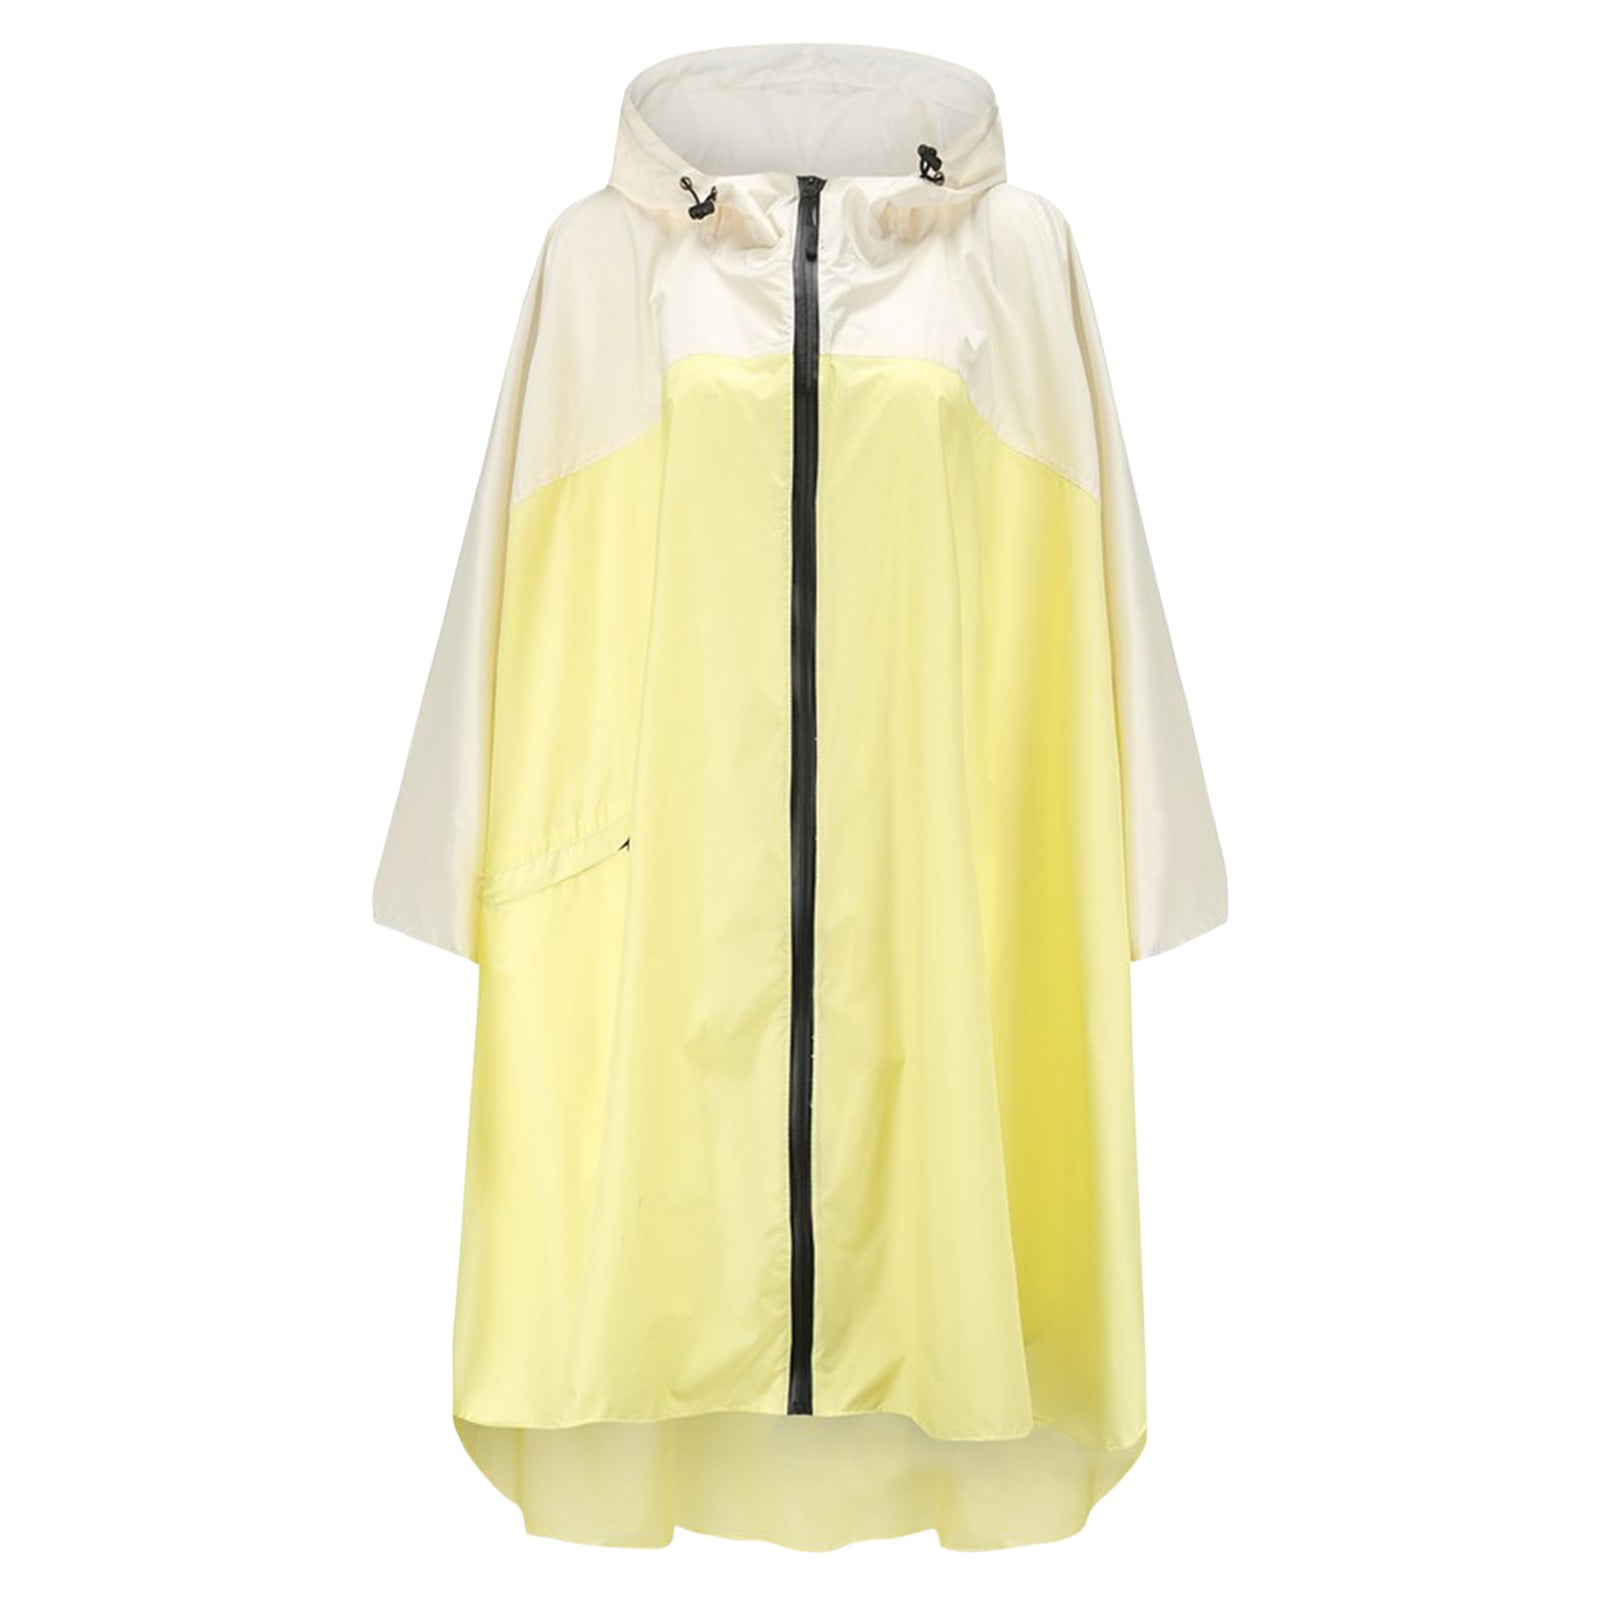 Unisex Raincoat Poncho Reusable Lightweight Rainwear in Polyester for Adult Wetry